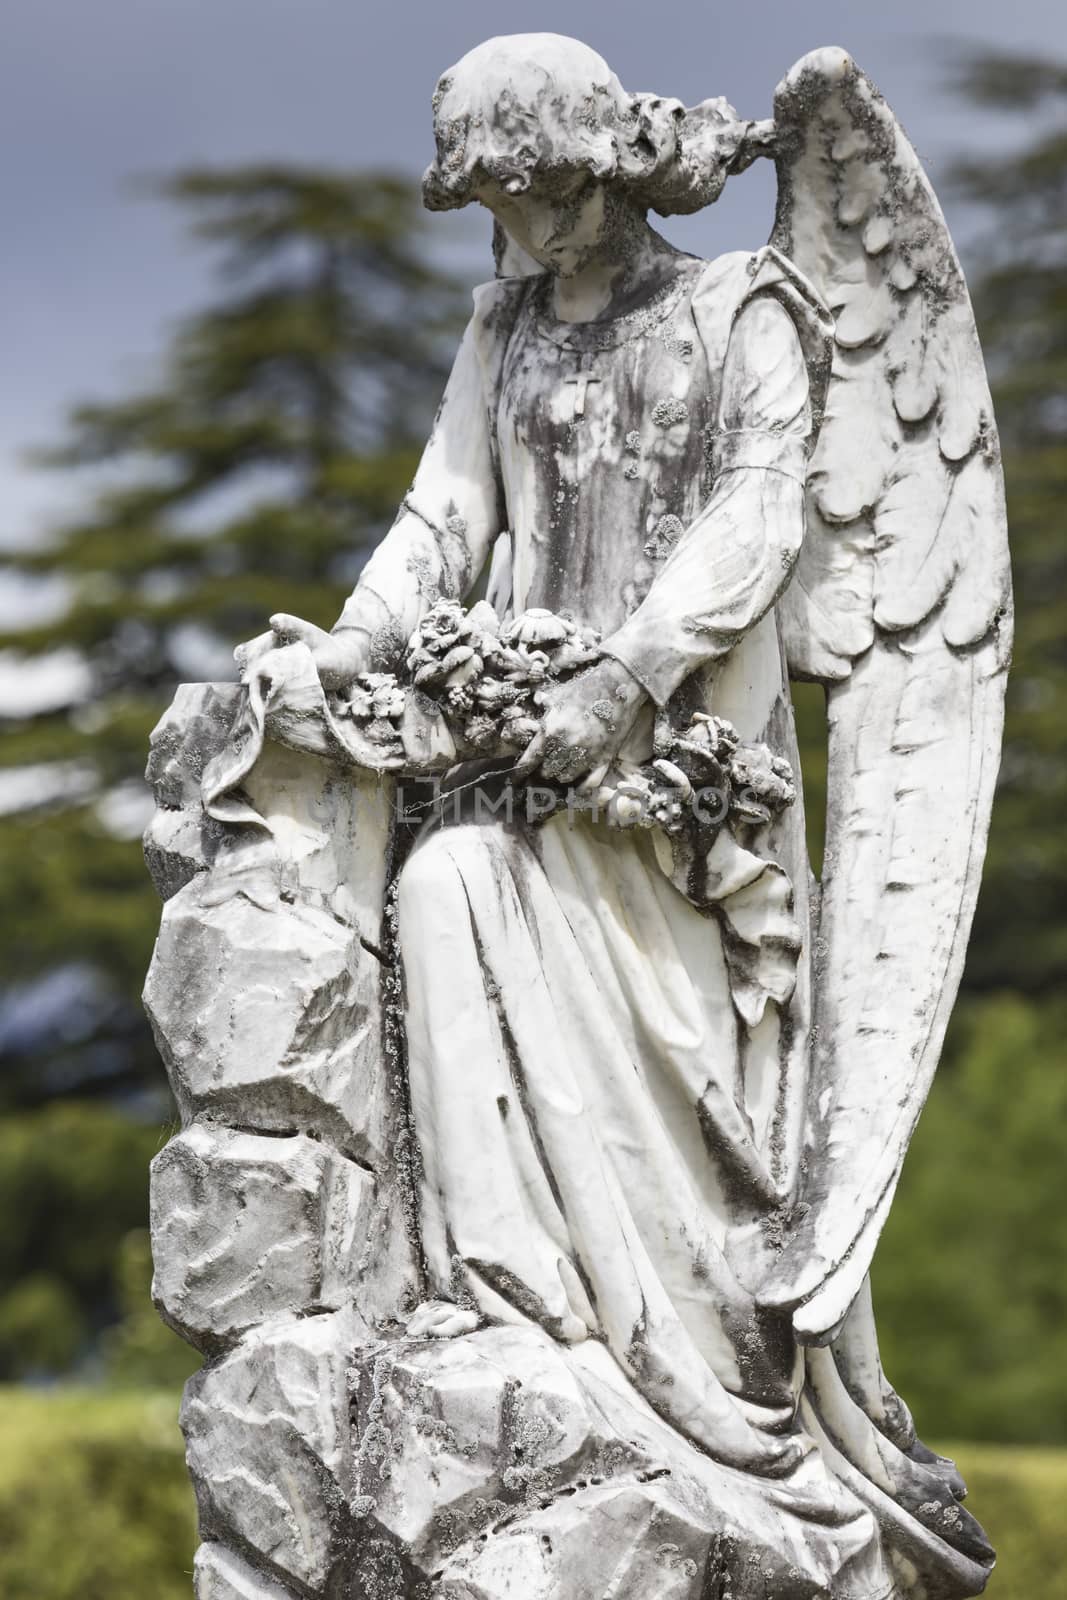 Selected cemetery statues

